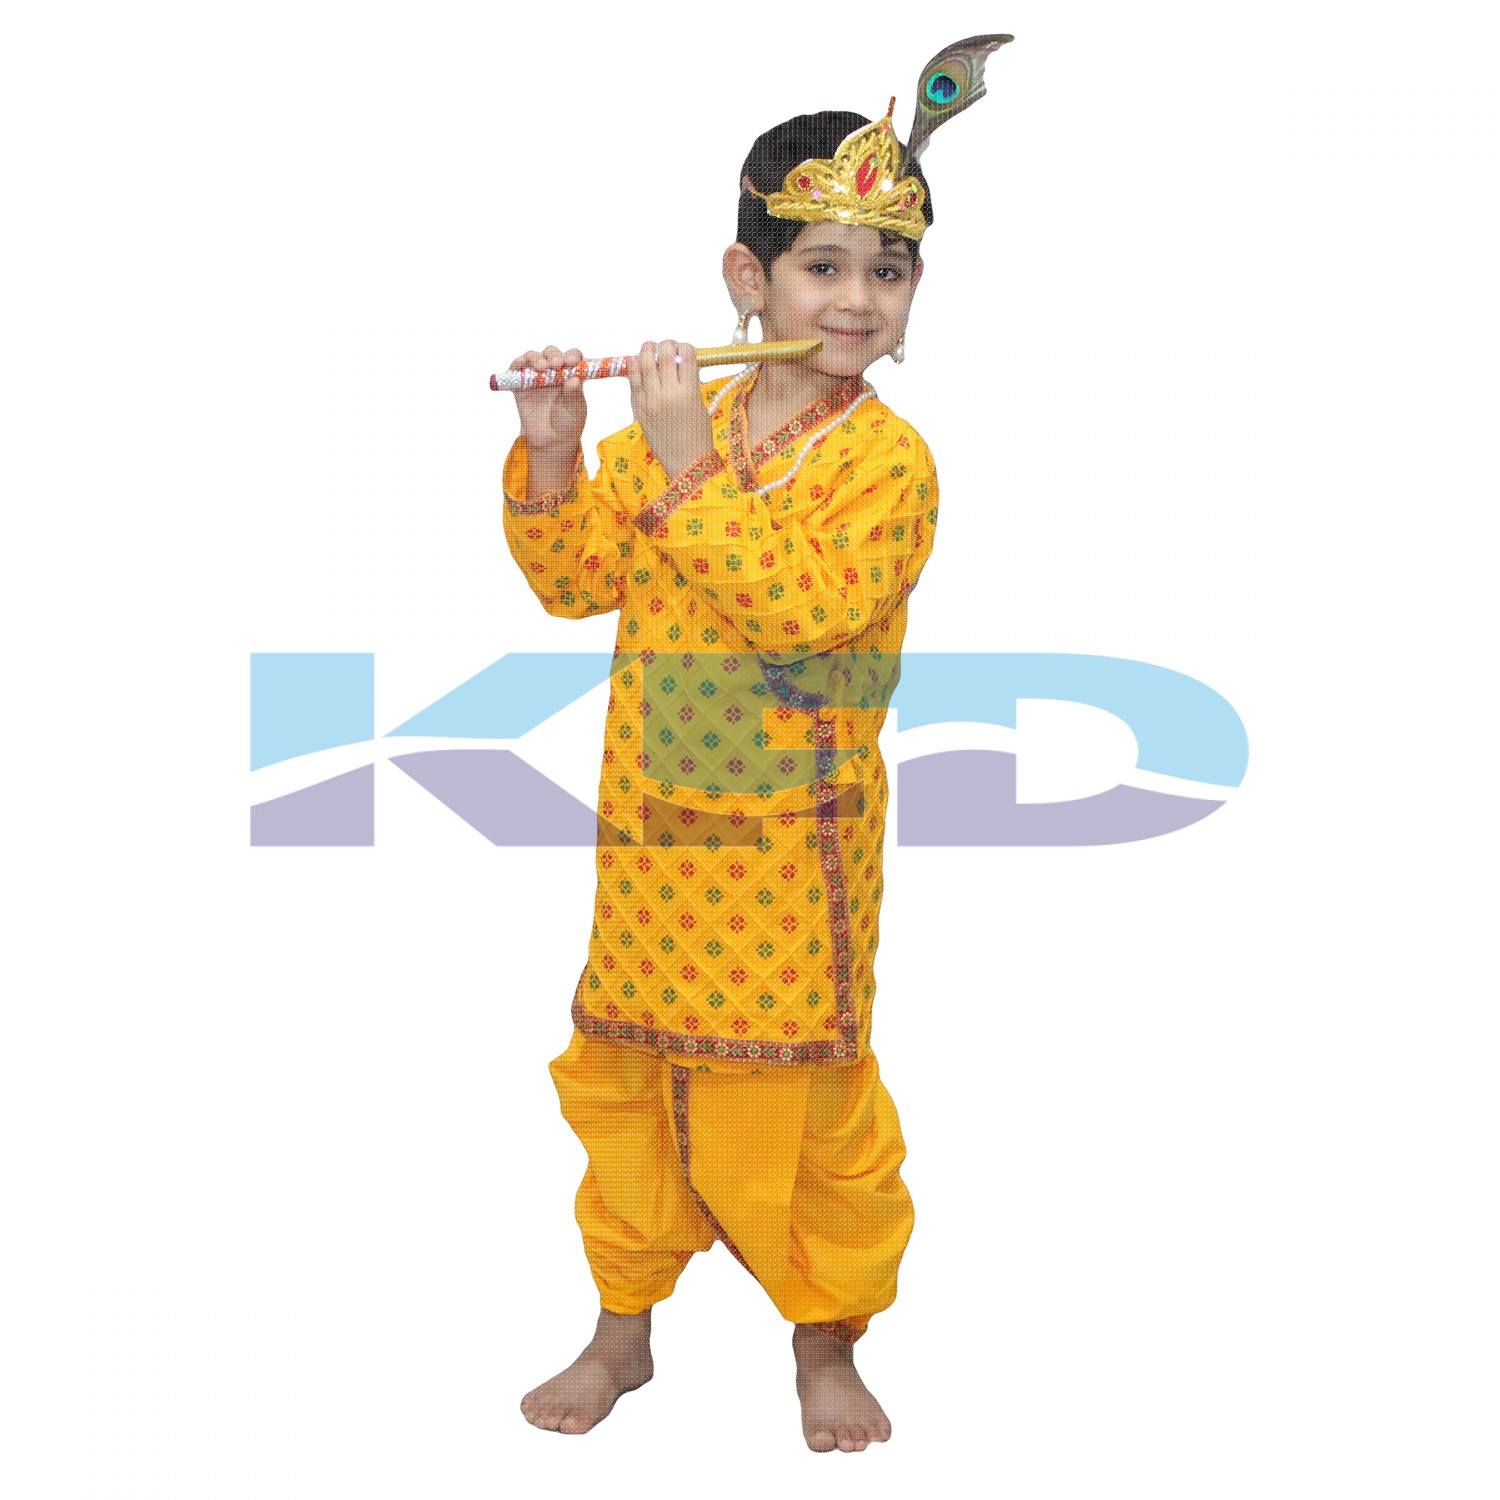 Krishna Printed In Cotton Fabric,Krishnaleela/Janmashtami/Kanha/Mythological Character For Kids School Annual functionTtheme Party/Competition/Stage Shows Dress